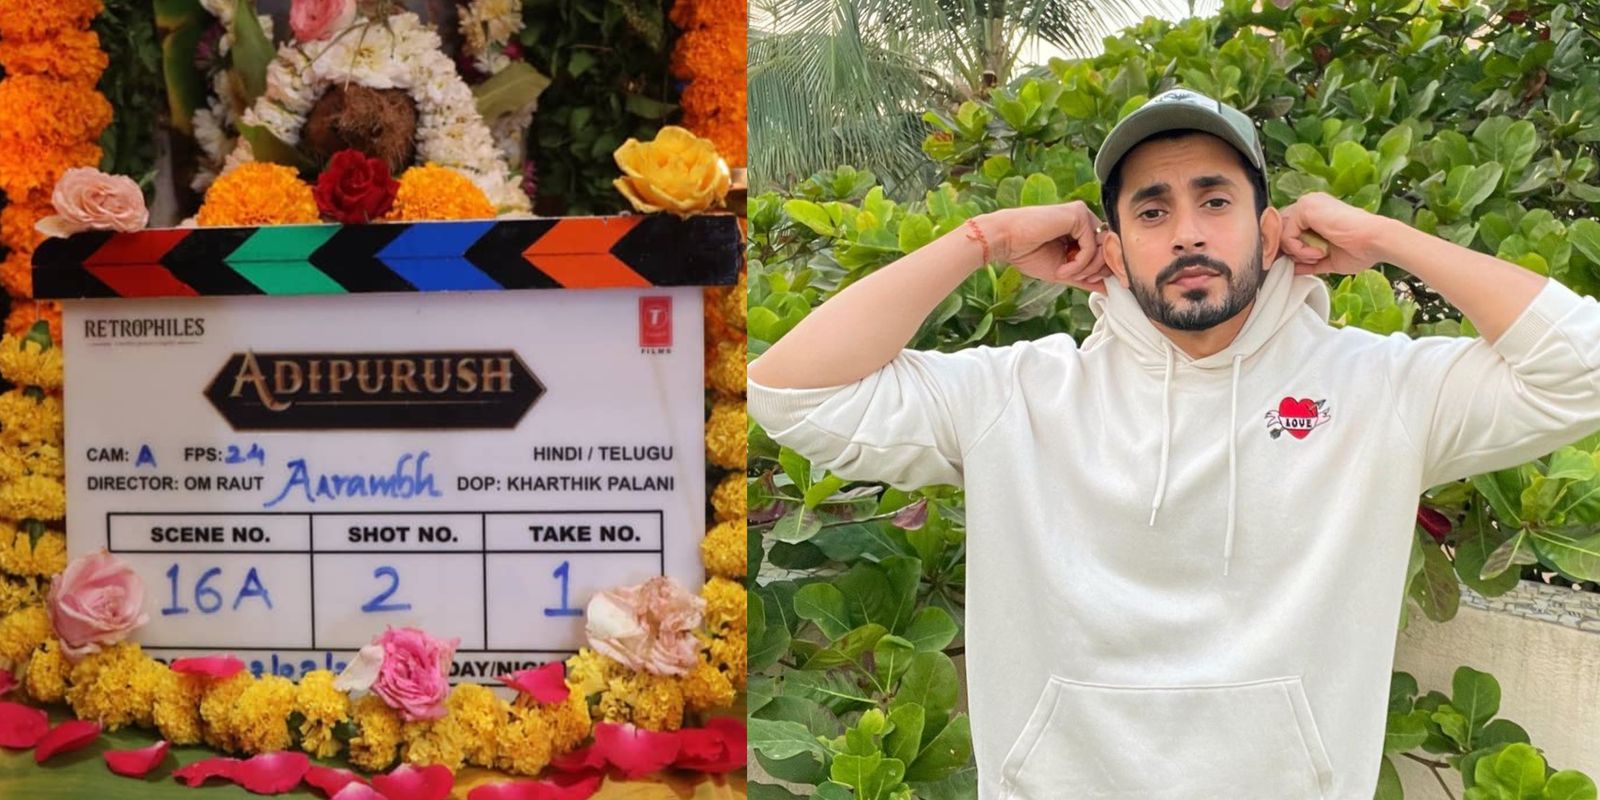 Adipurush: Sunny Singh Gets A Warm Welcome From Director Om Raut